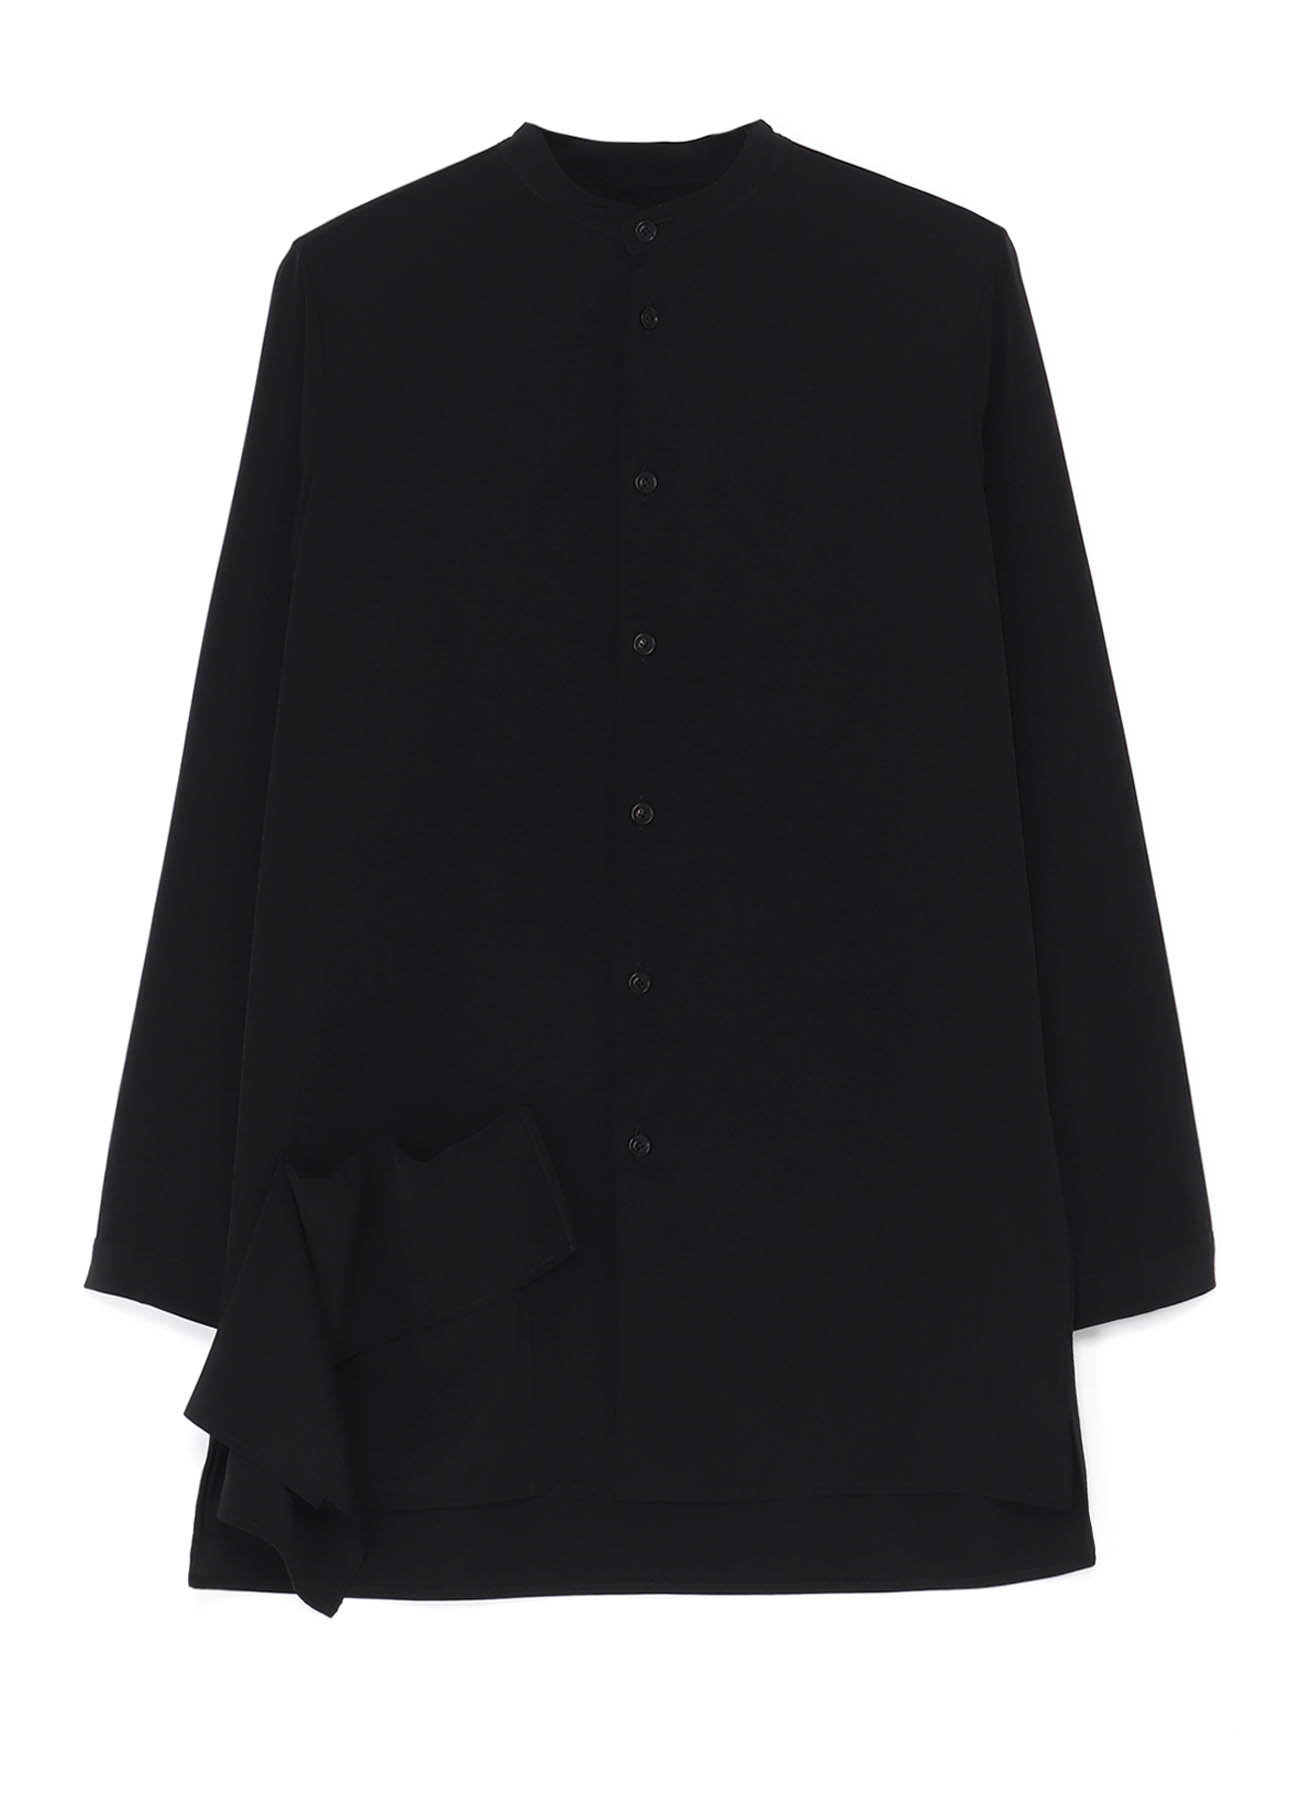 TRIACETATE POLYESTER CREPE de CHINE FLAP POCKET STAND COLLAR SHIRT